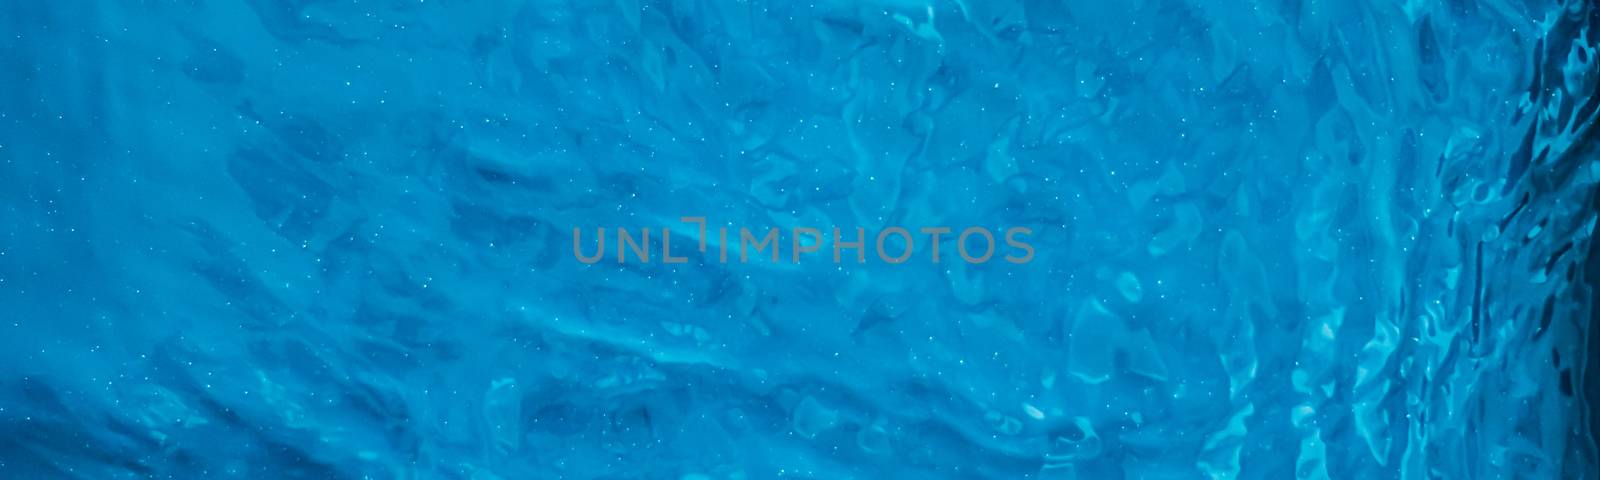 Blue water texture as abstract background, swimming pool and waves design by Anneleven